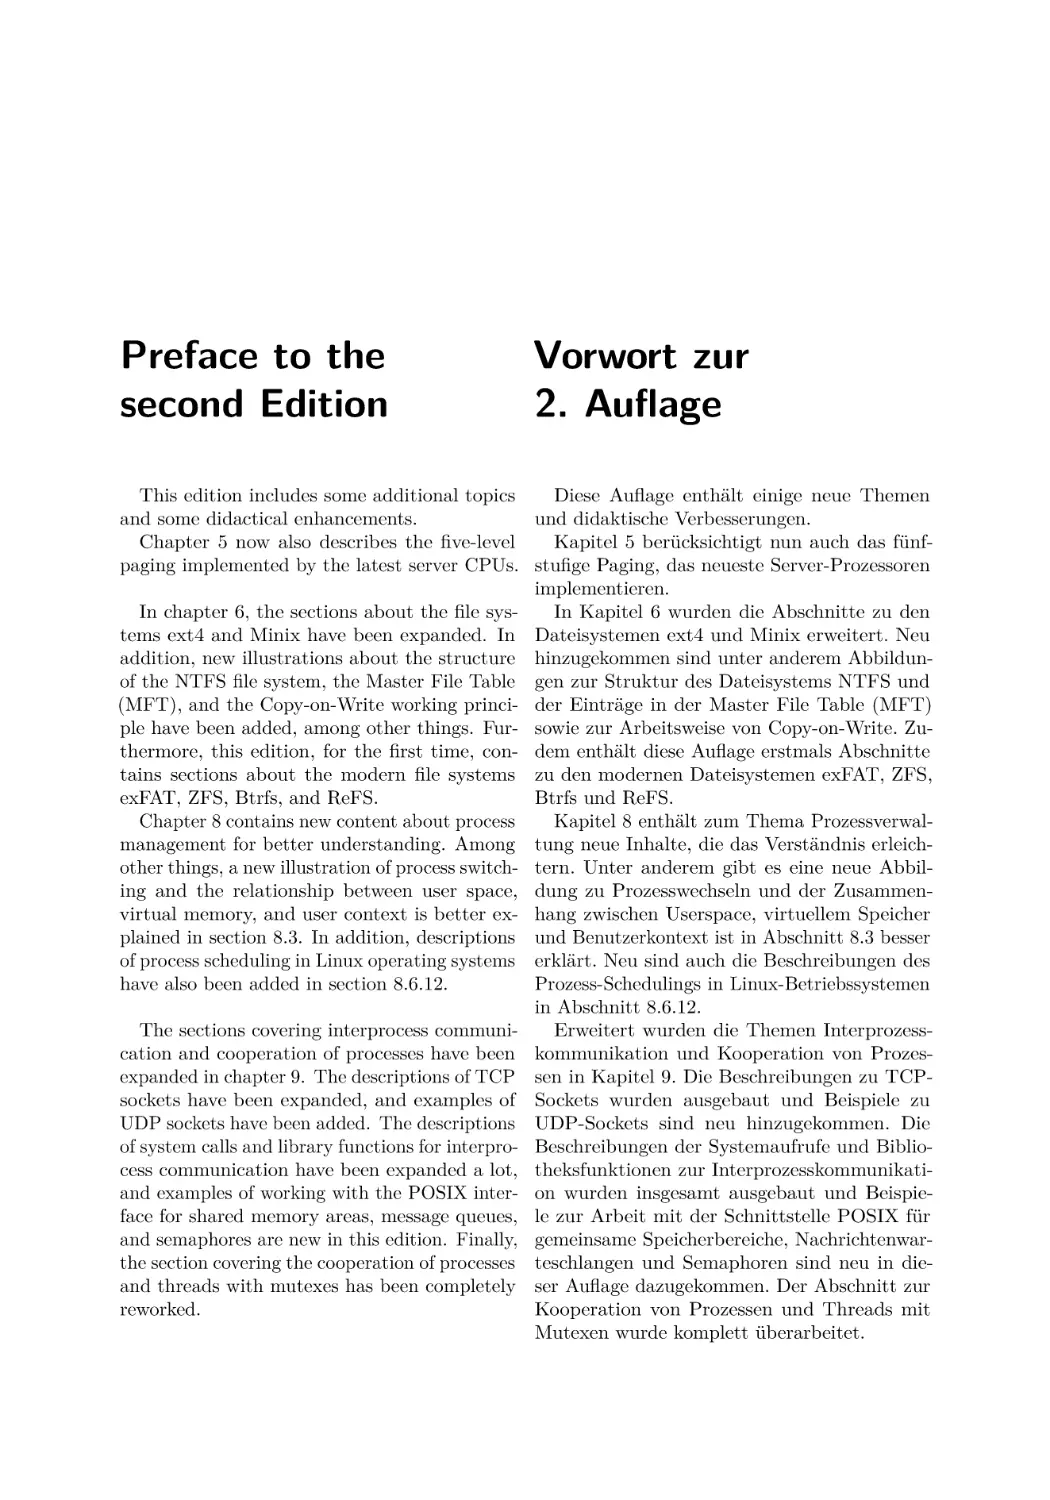 Preface to the second Edition